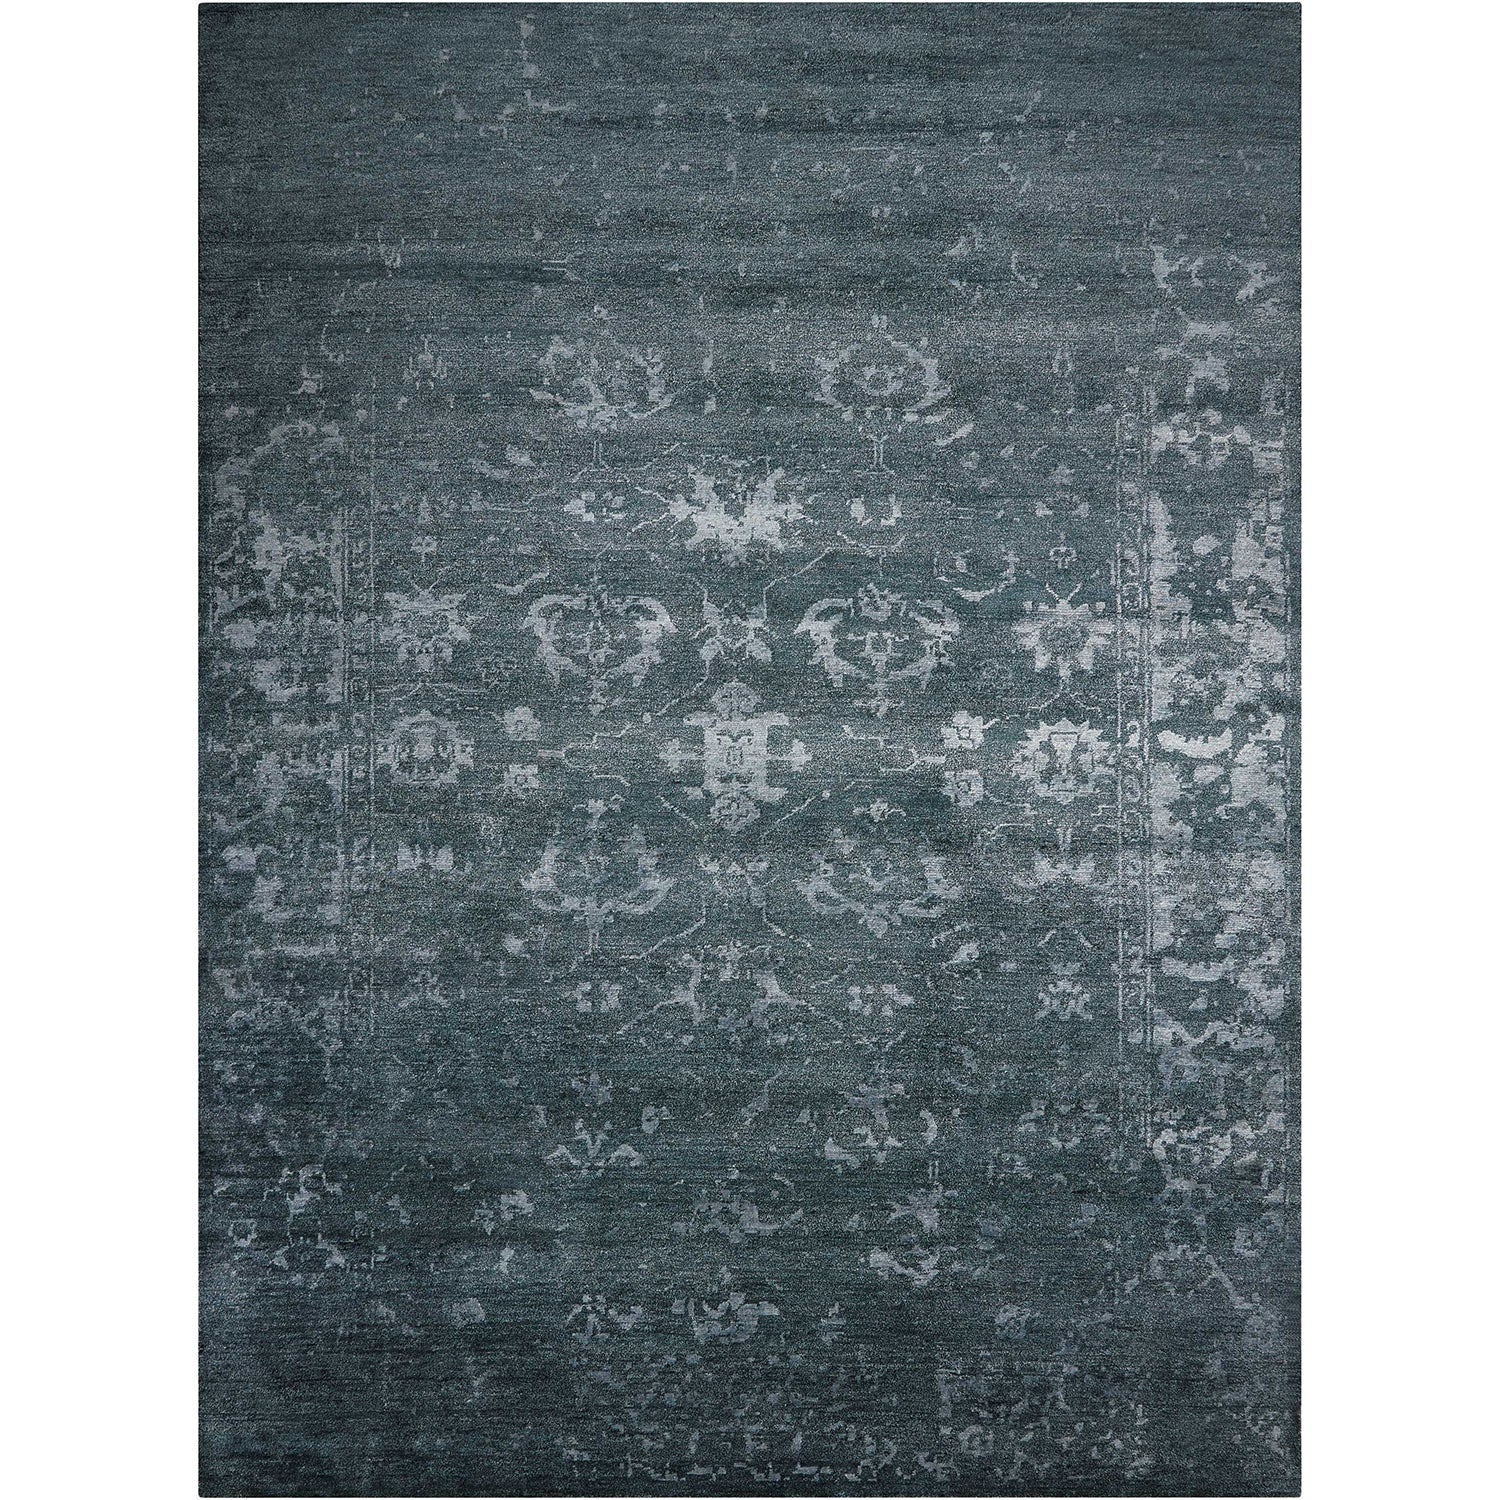 Vintage distressed area rug with gray faded floral patterns